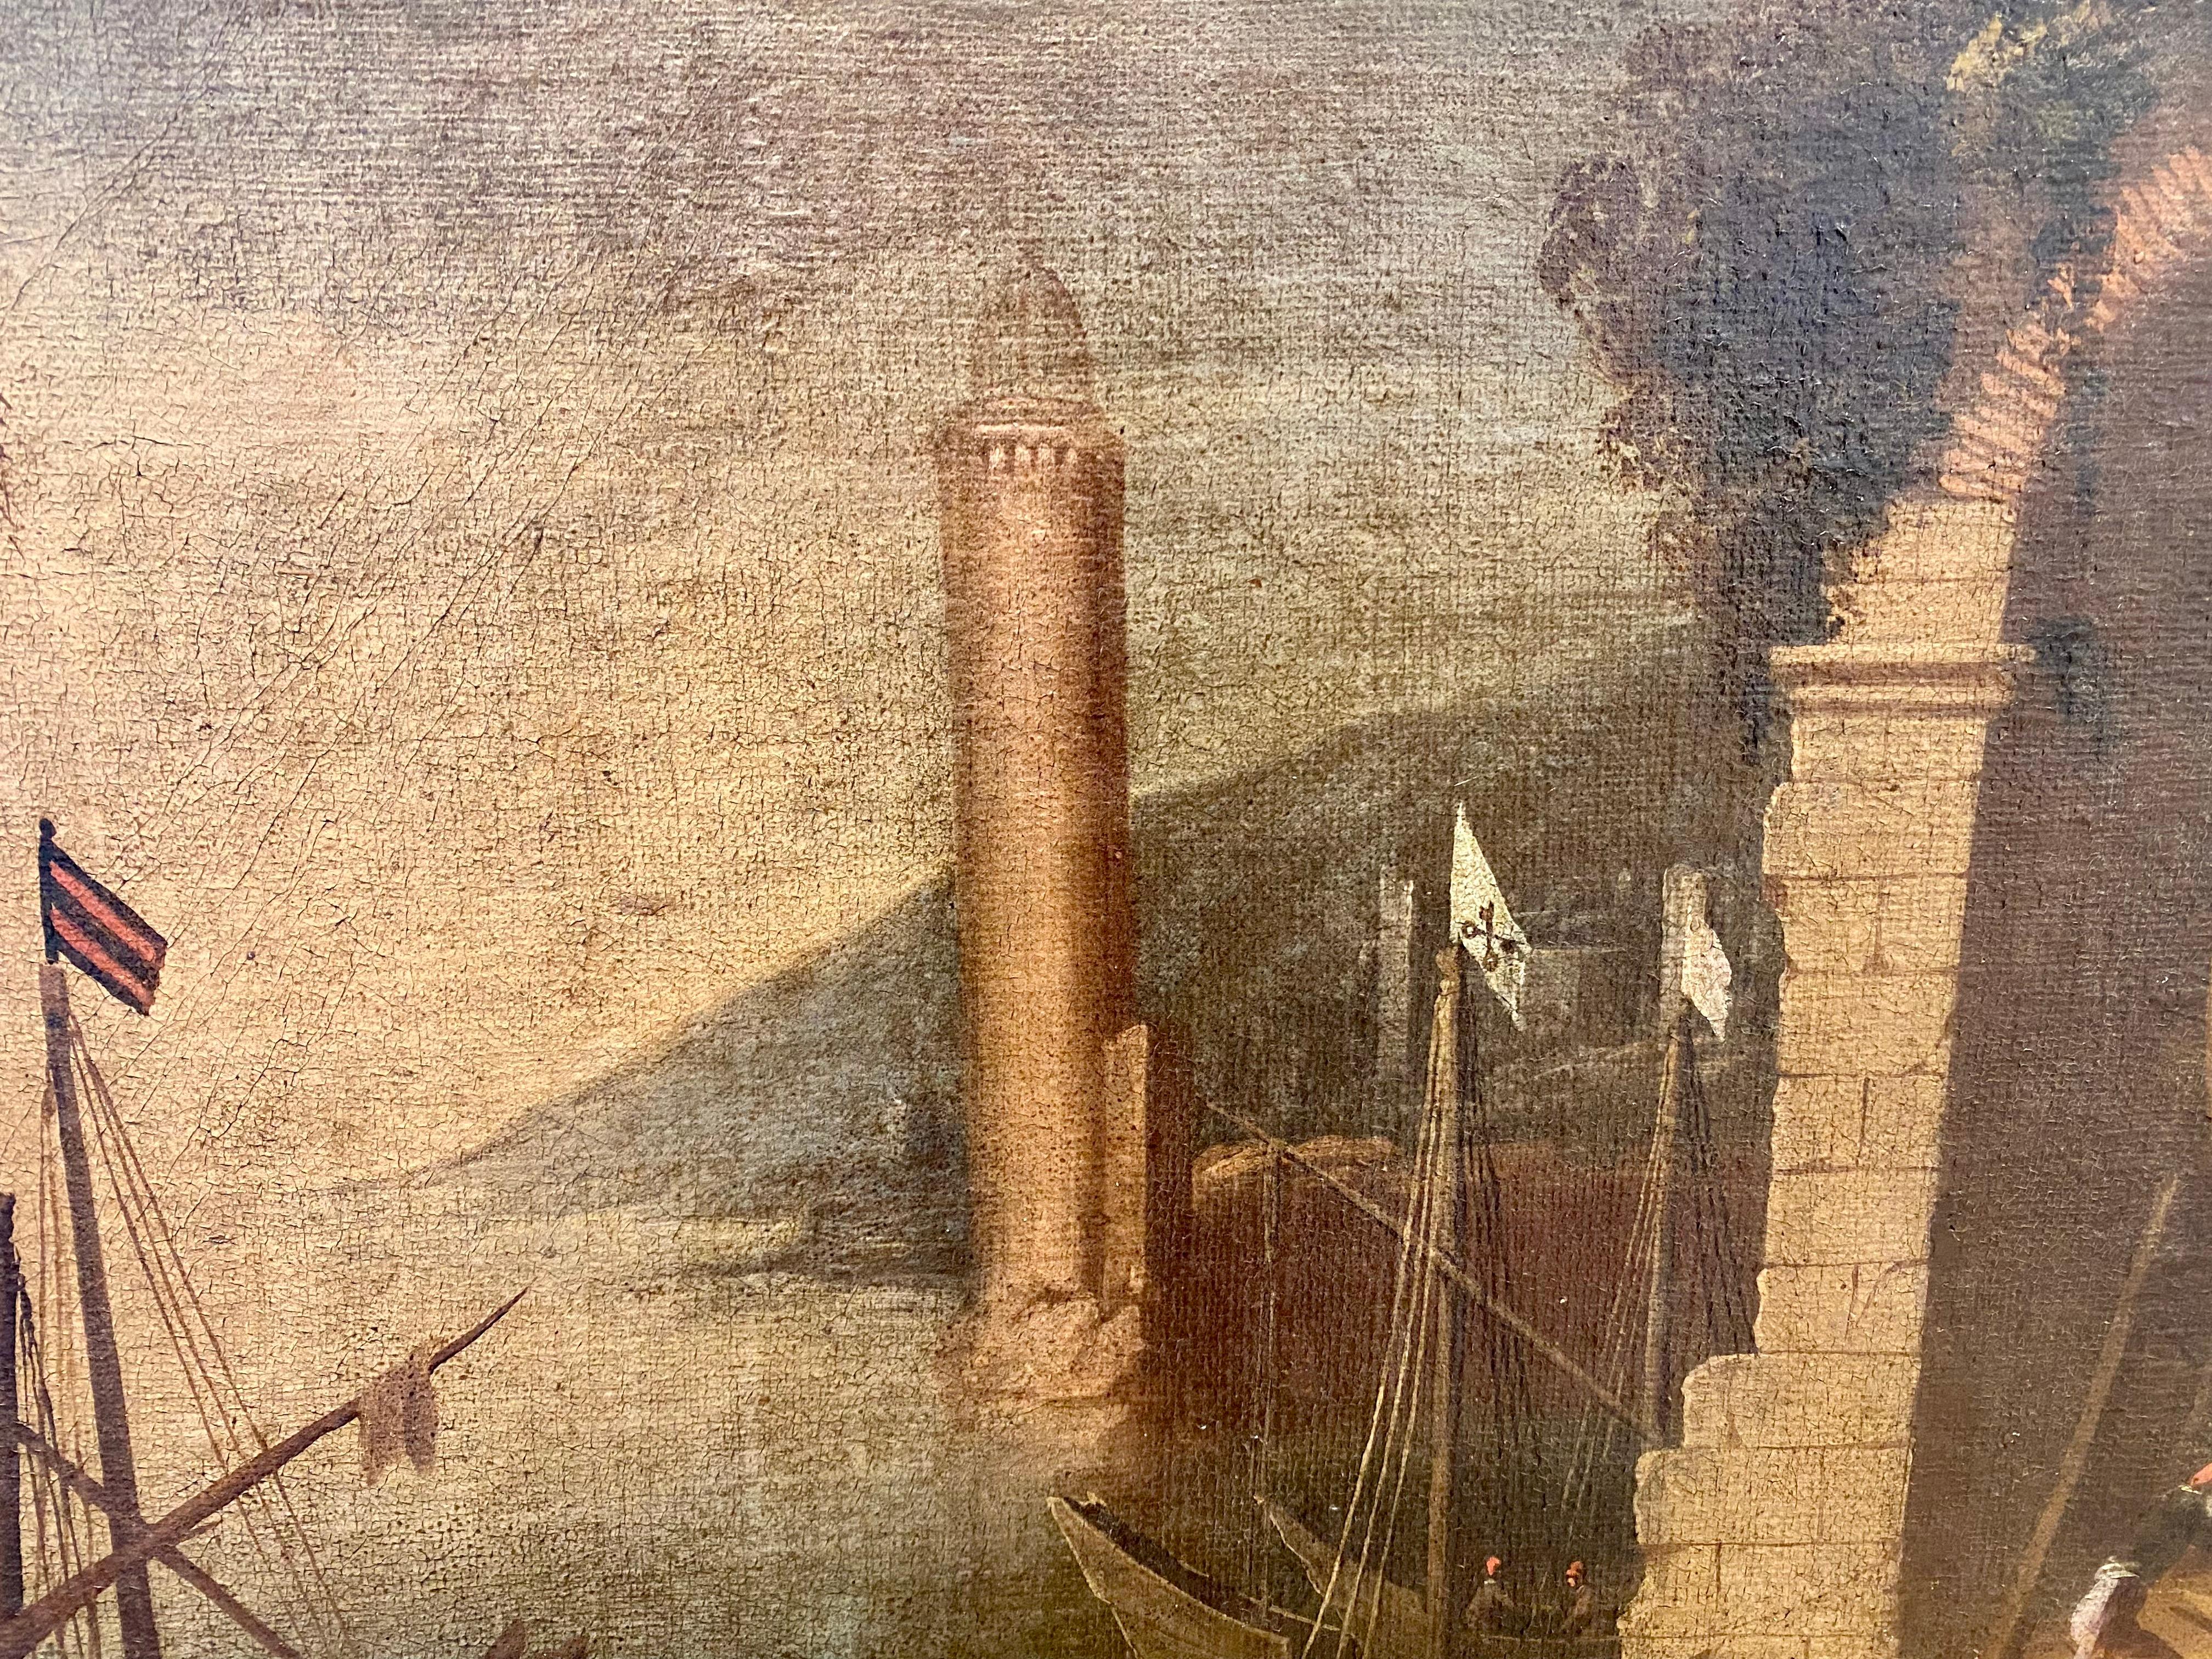 Italian View of the Livorno Lighthouse, First Quarter of 19th Century

This painting represents the view of the Livorno dock with the lighthouse in the background.
The different details in this picture could identify it as a historical view. The